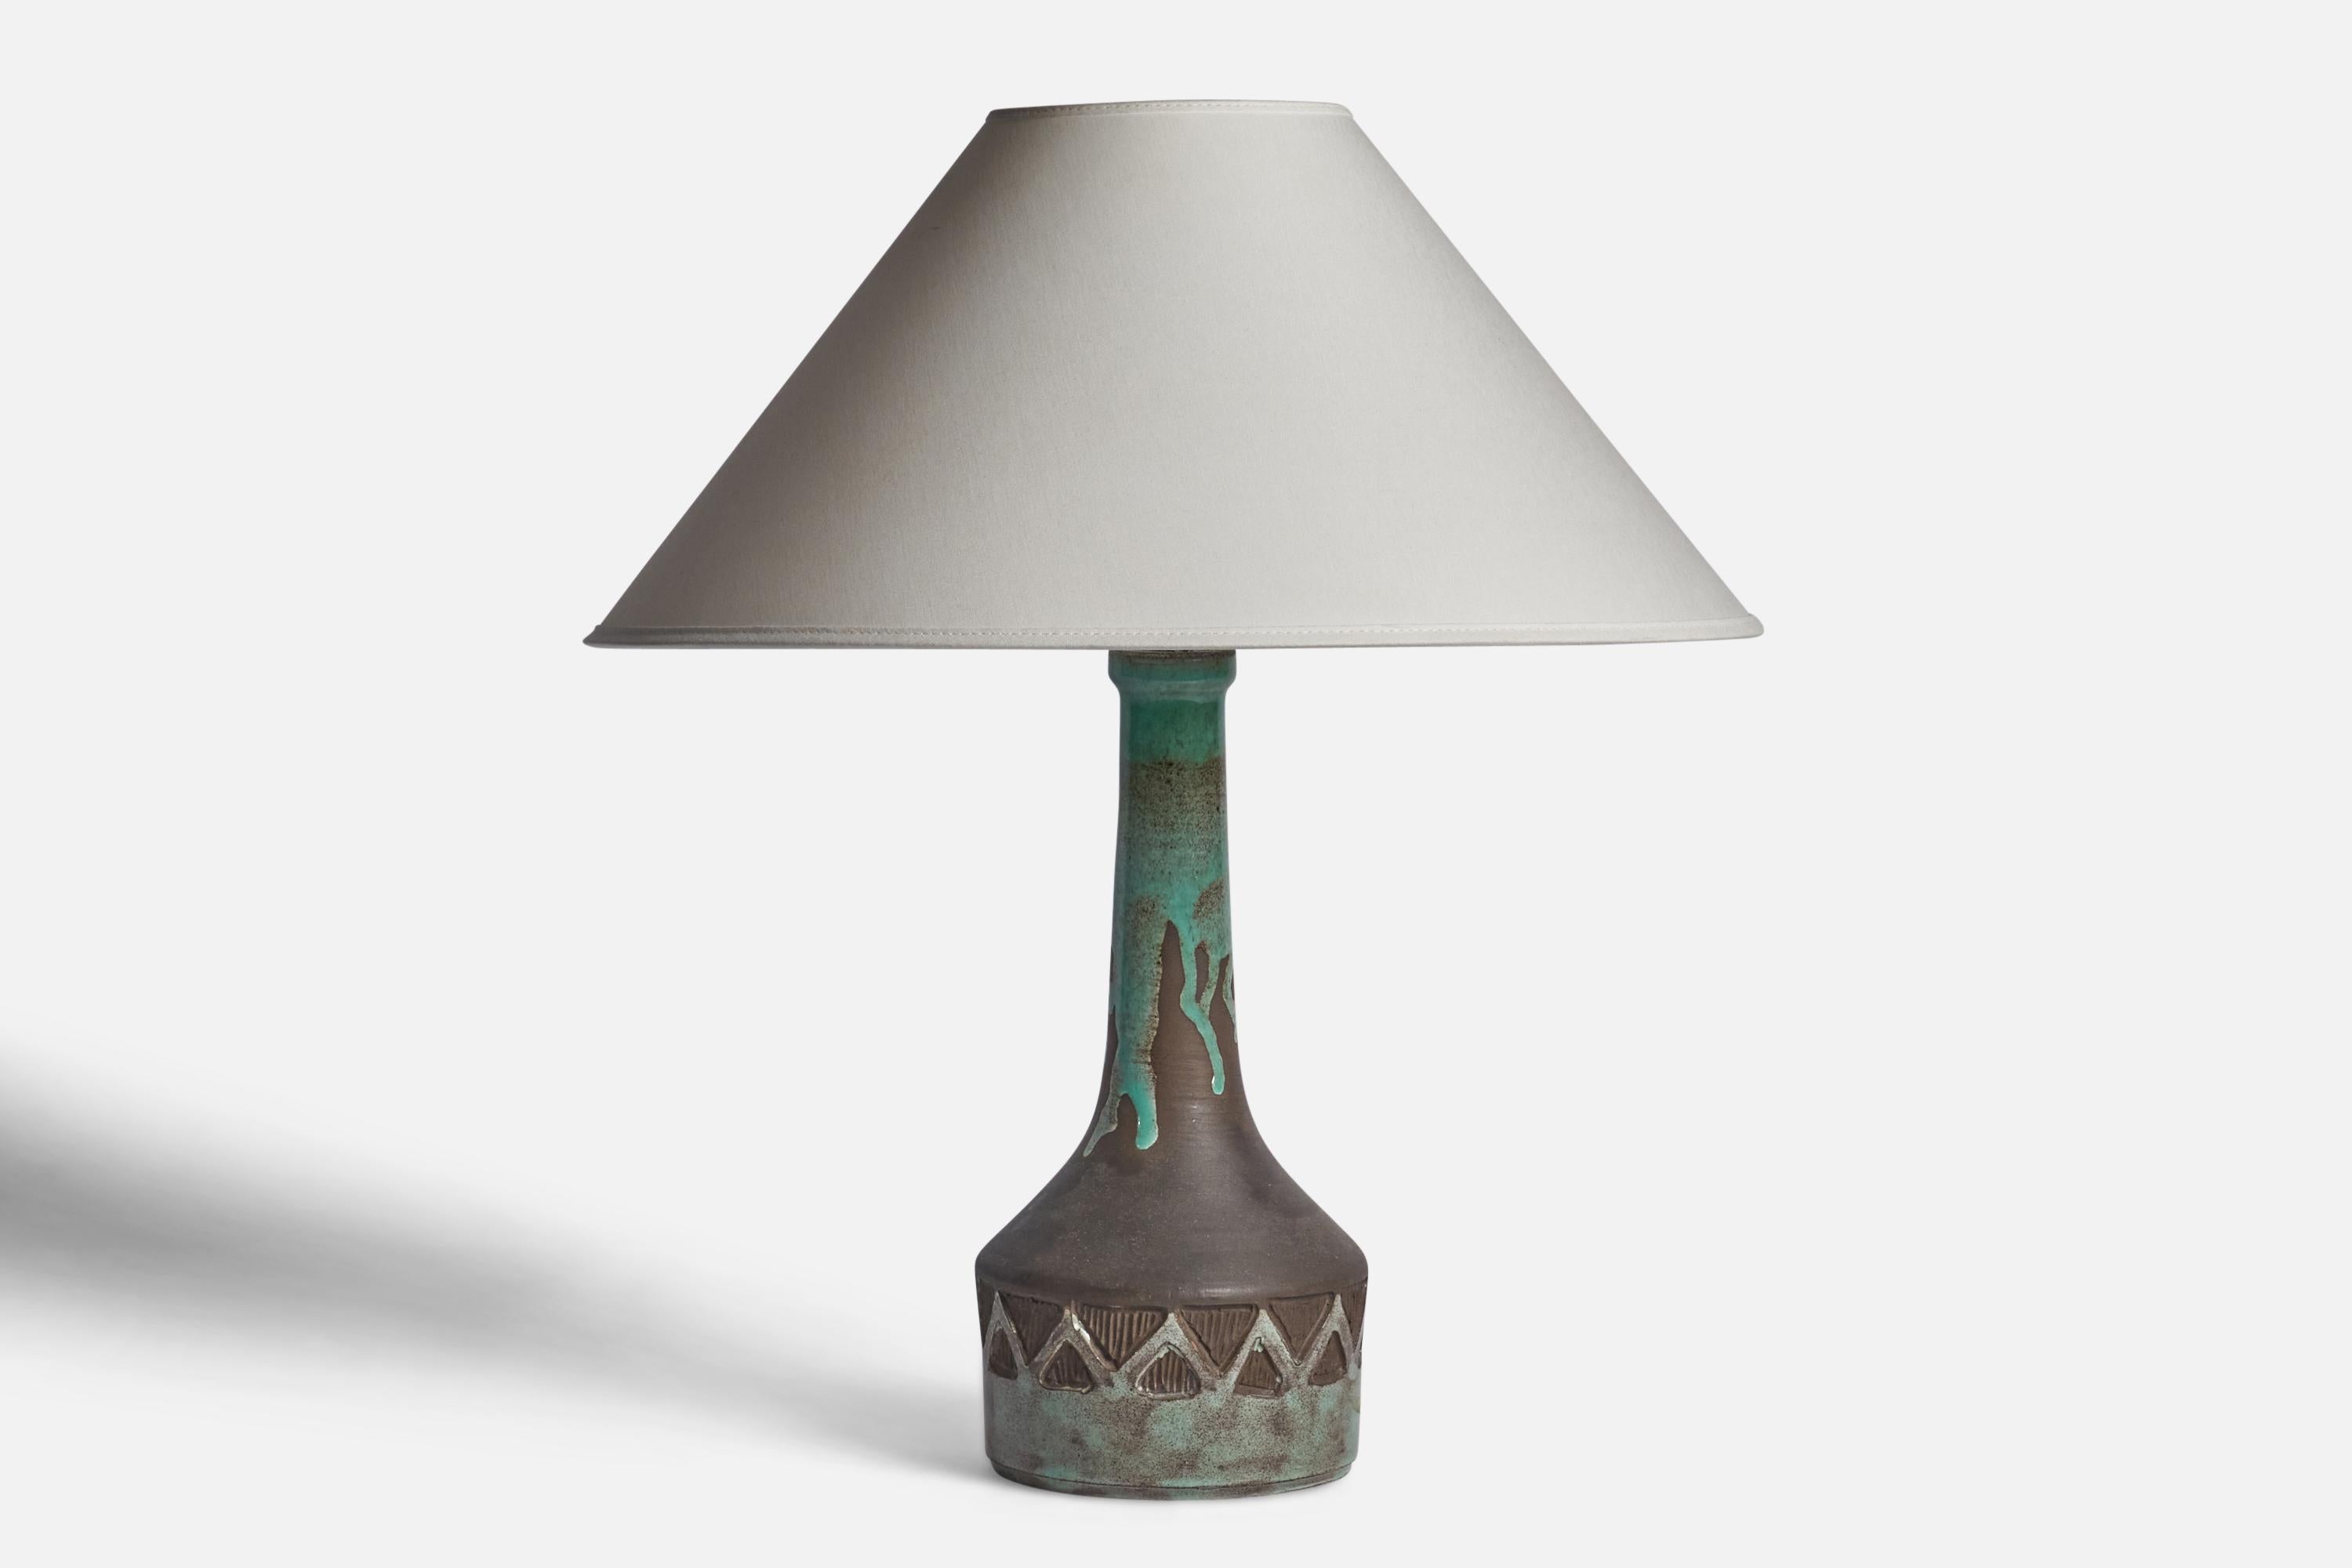 A green and grey-glazed stoneware table lamp designed and produced in Denmark, 1960s.

Dimensions of Lamp (inches): 14.25